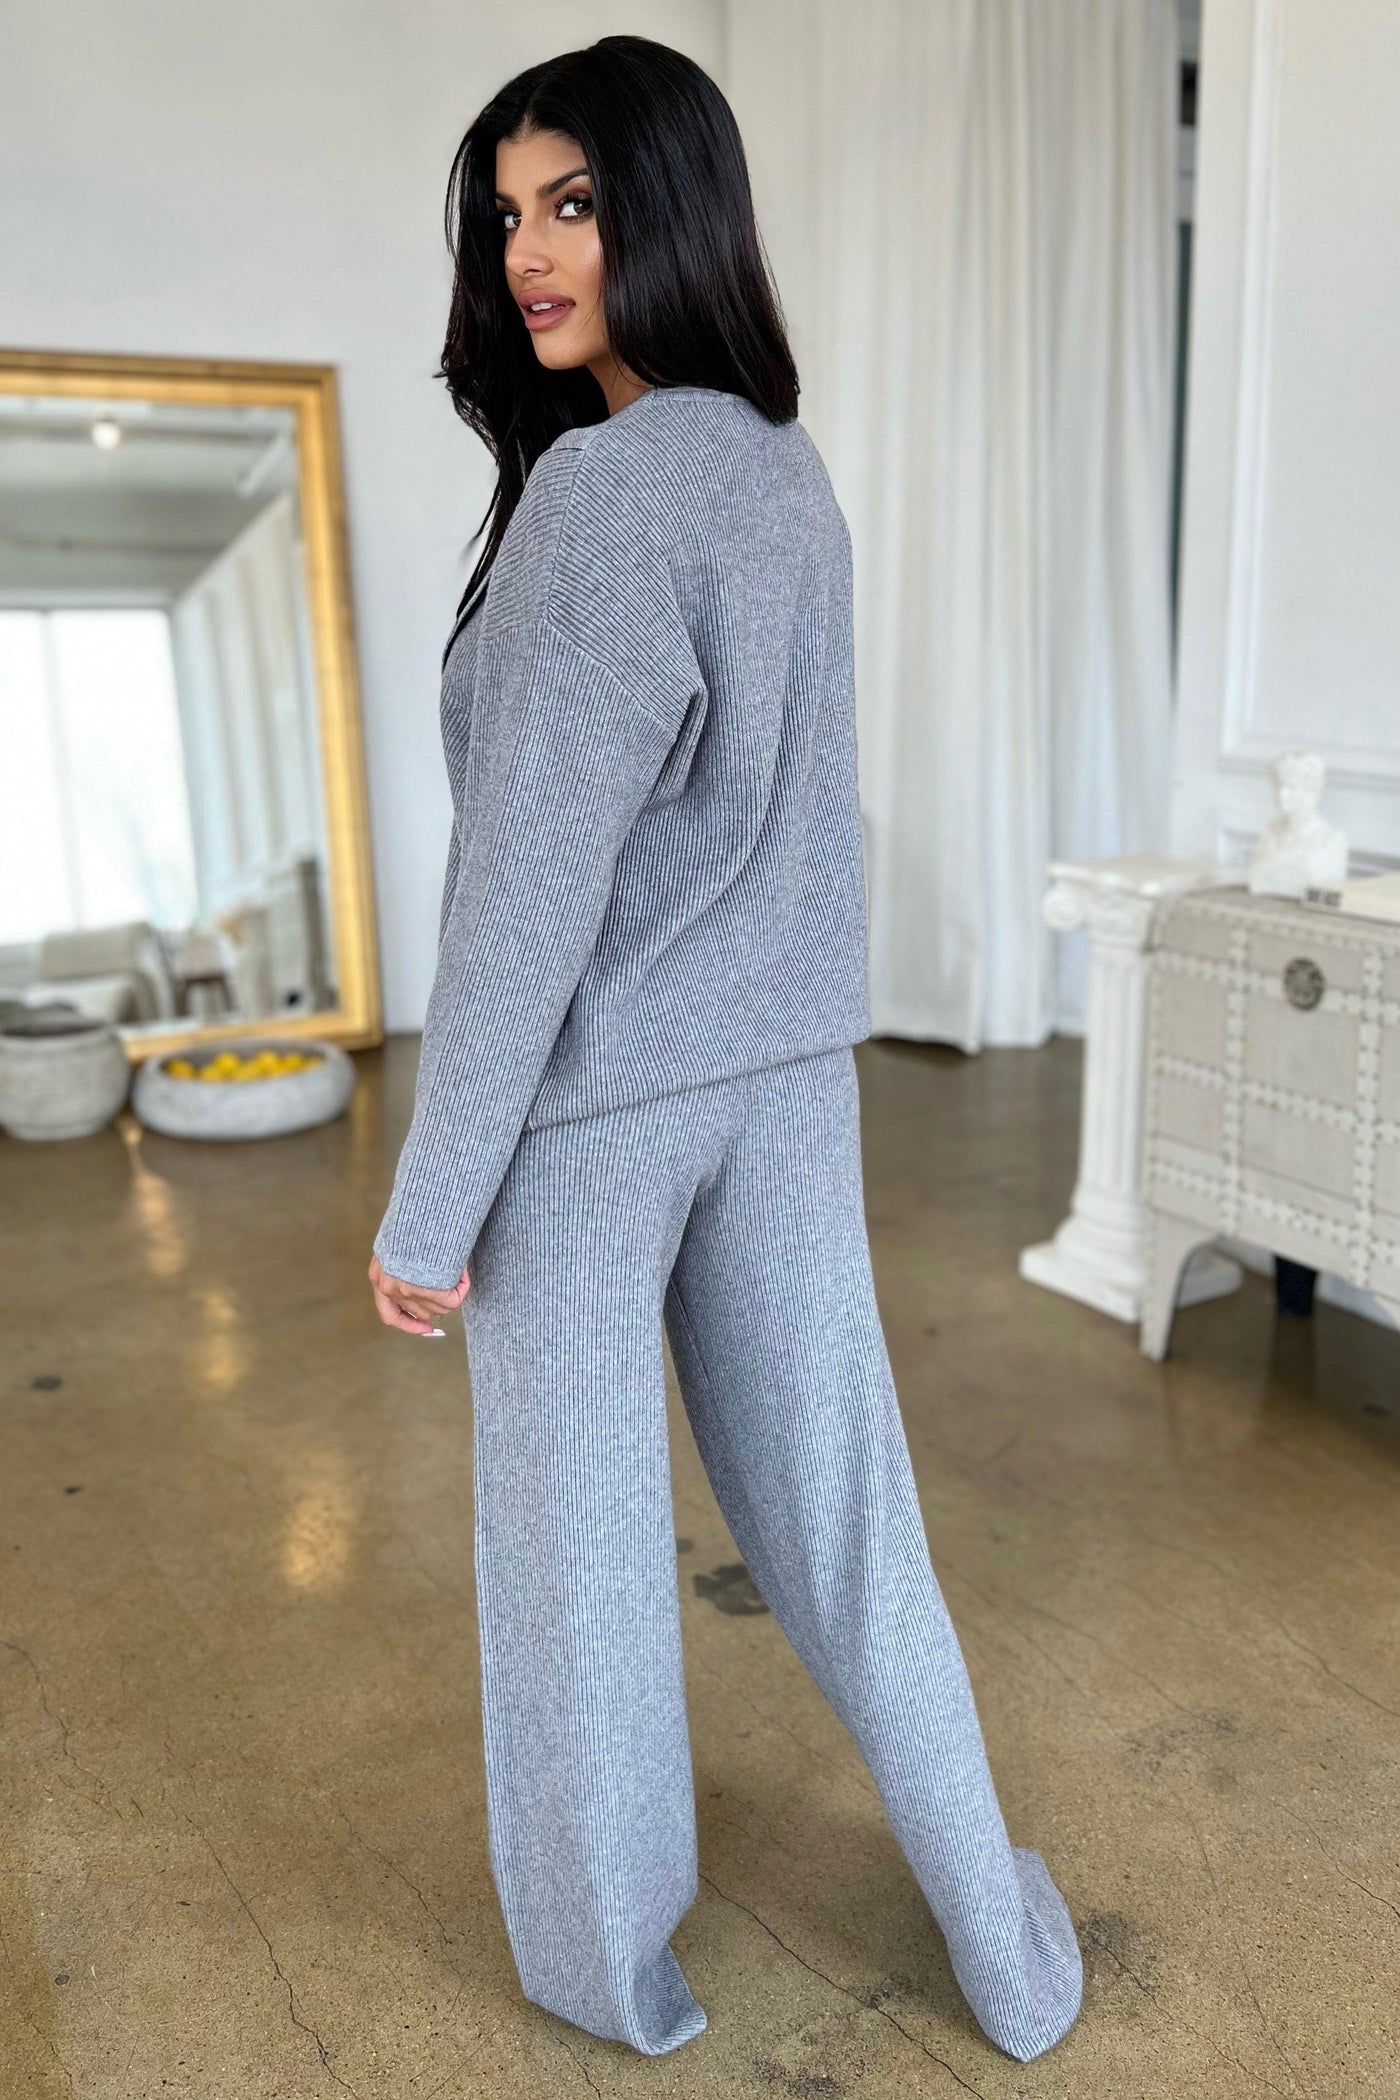 FASHIONISTA KNIT PANTS , Pants , It's NOMB , CHIC LOUNGEWEAR SET, DRESSY ATHLEISURE, KNIT SWEATER PANTS, PERFECT TRAVEL OUTFIT , It's NOMB , itsnomb.com